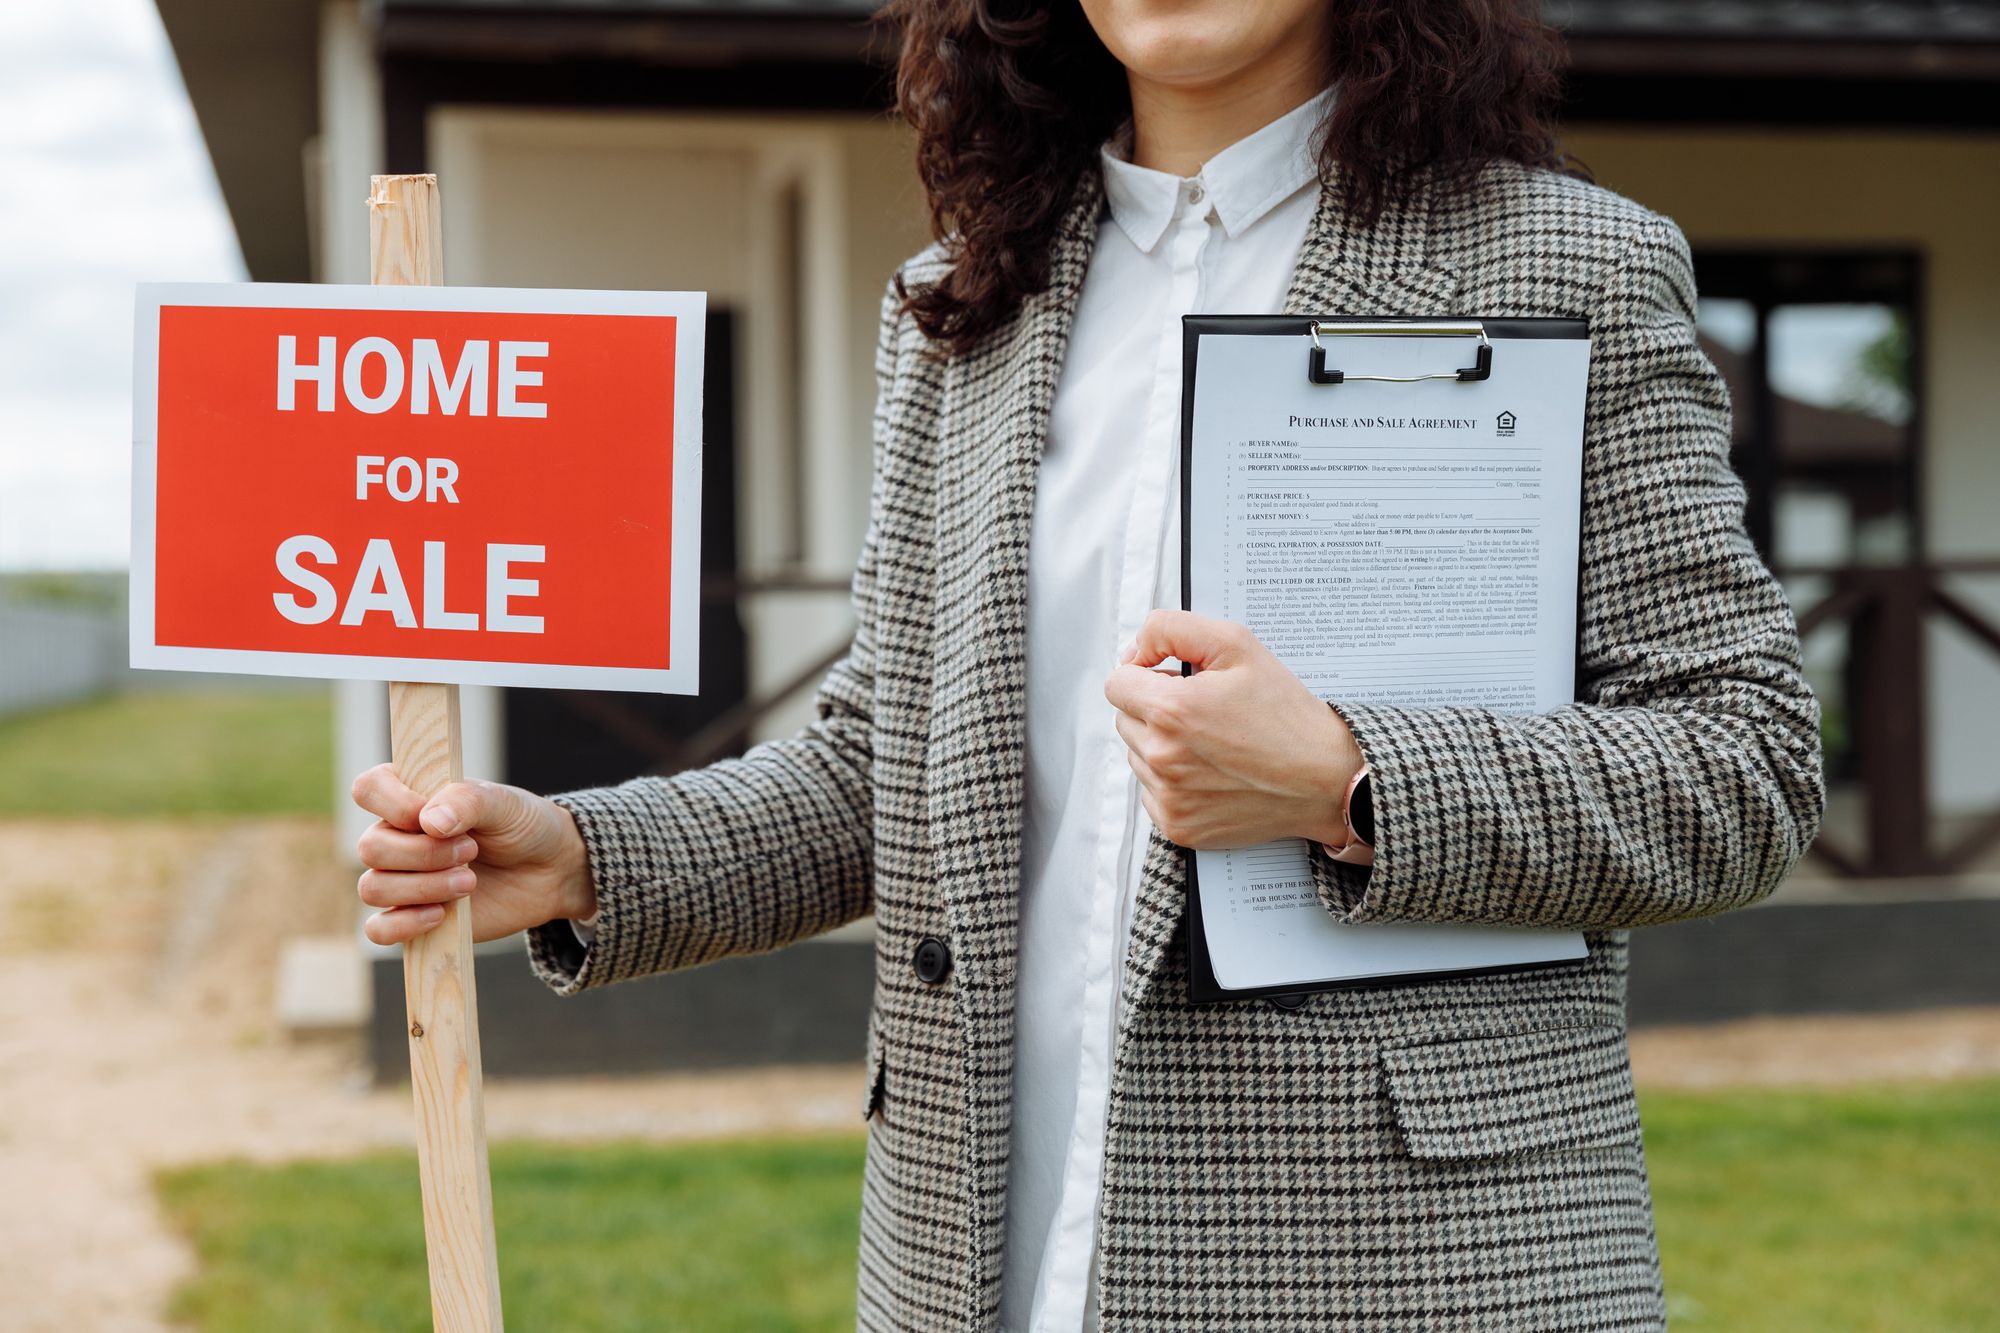 5 Fastest Methods to Consider When Selling a Home in Virginia